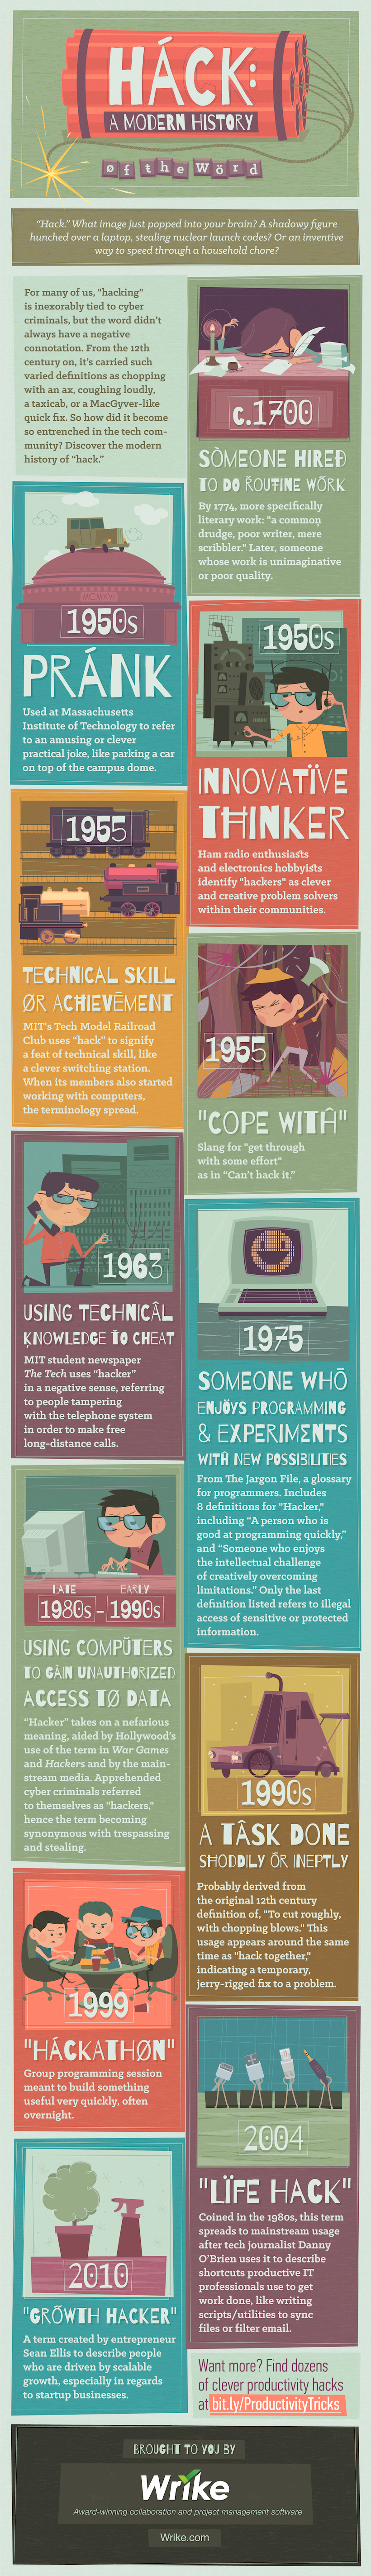 The History of the Word ‘Hack’ - by Wrike project management software